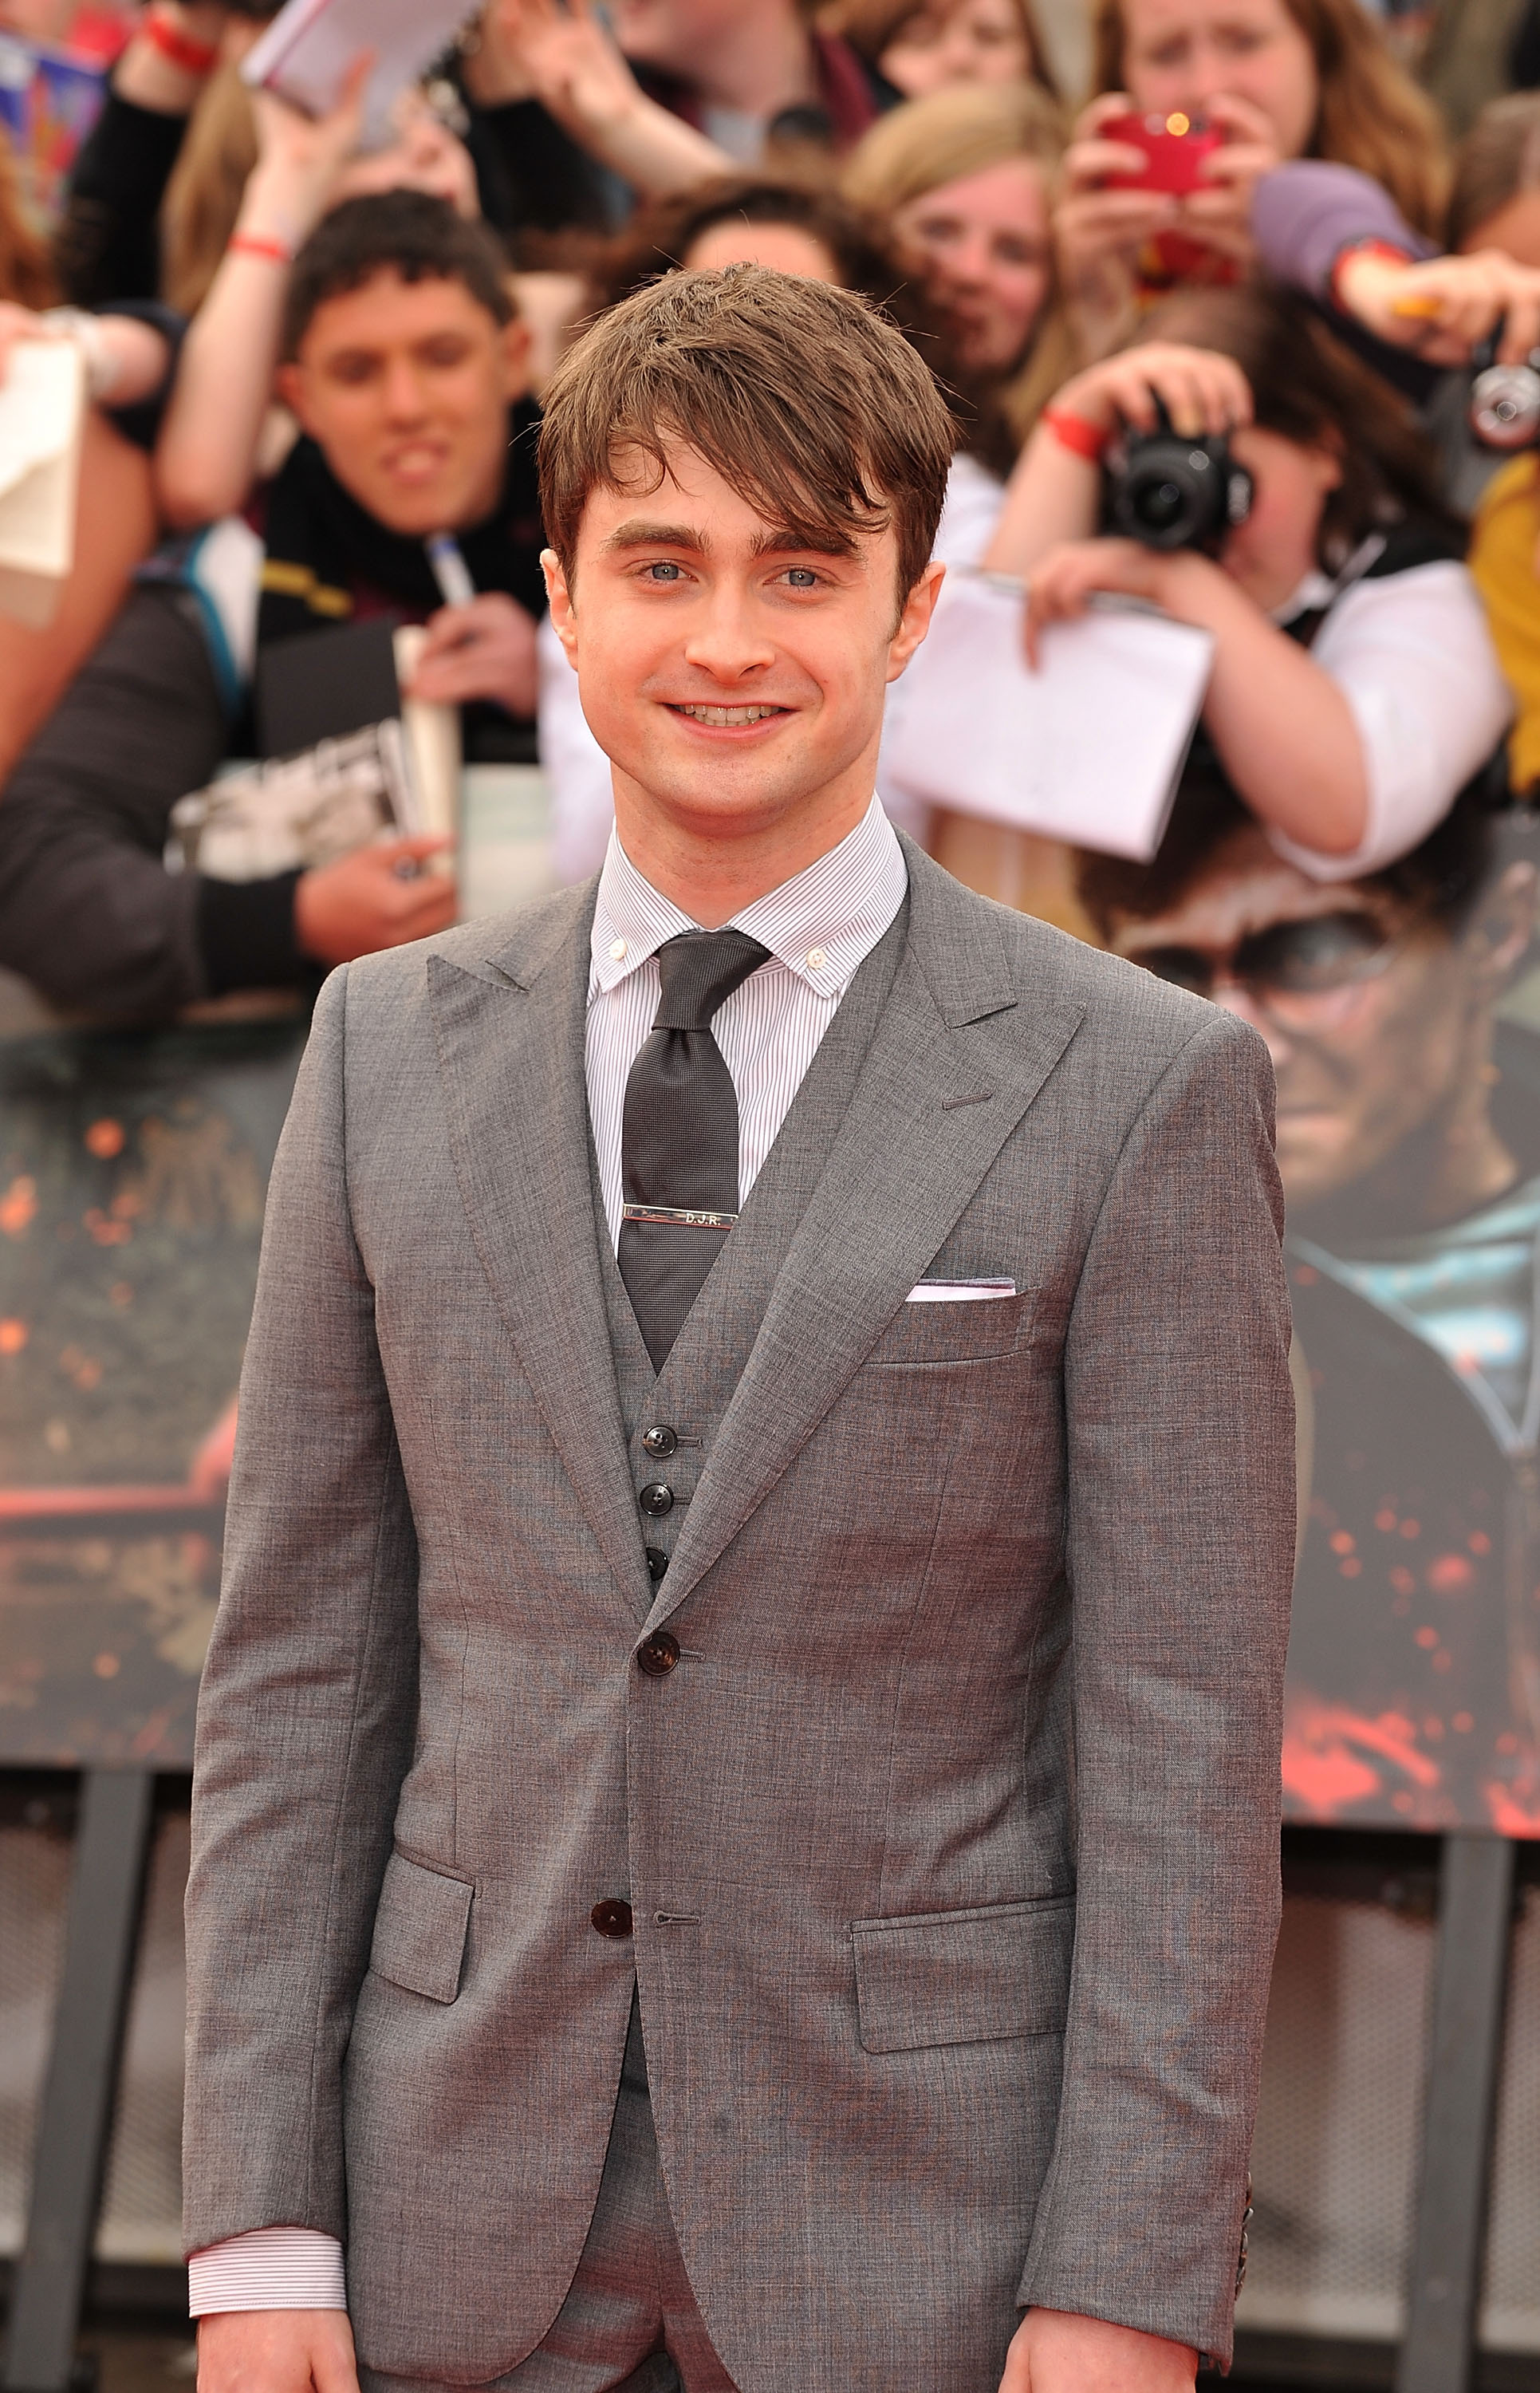 Daniel Radcliffe at the London premiere of Harry Potter and the Deathly Hallows: Part 2 in 2011